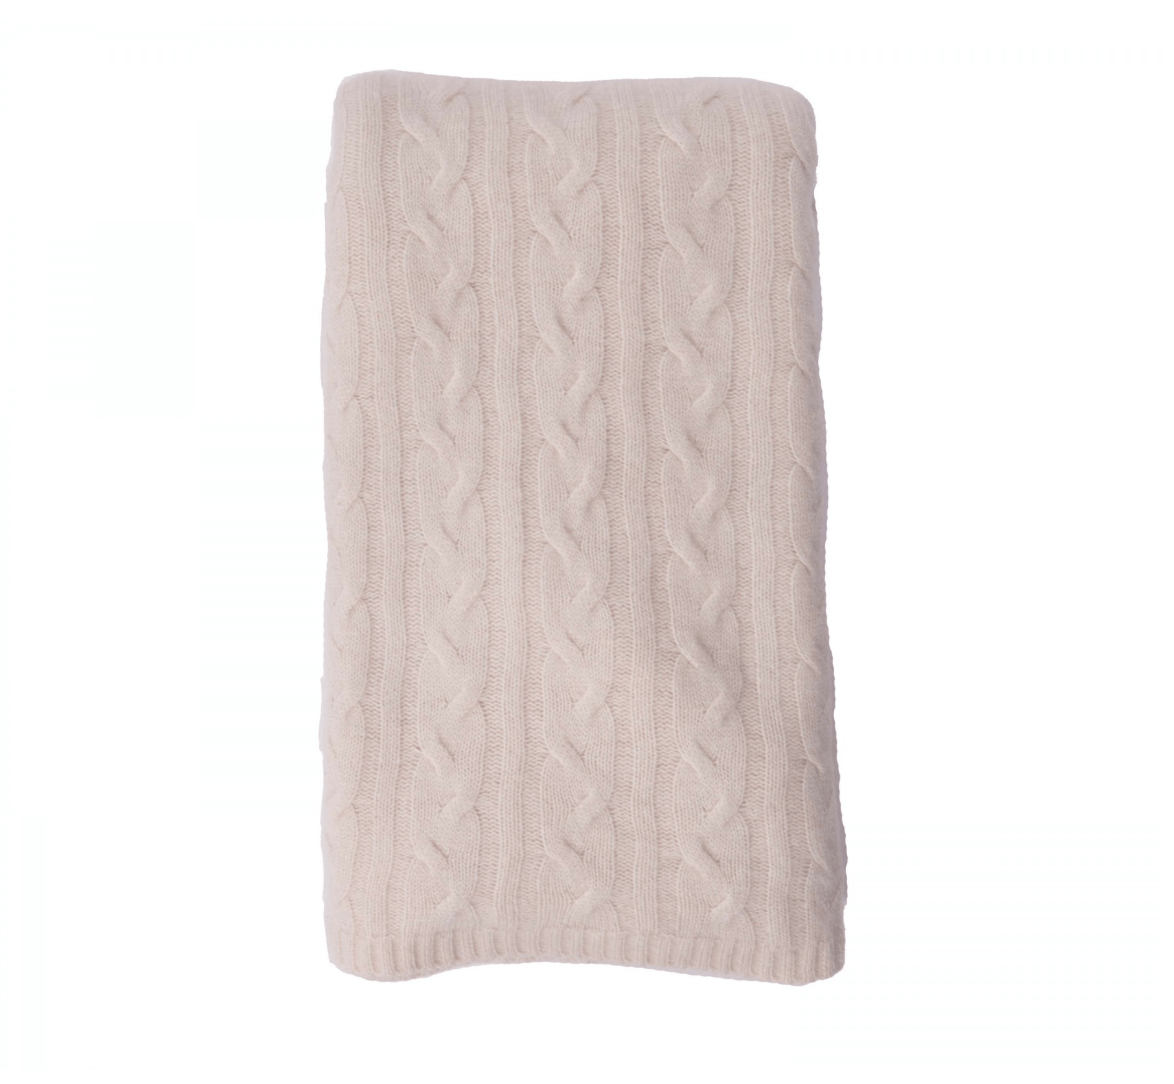 100% Cashmere Throw - Snow 229 - Alashan Cashmere at Fig Linens and Home